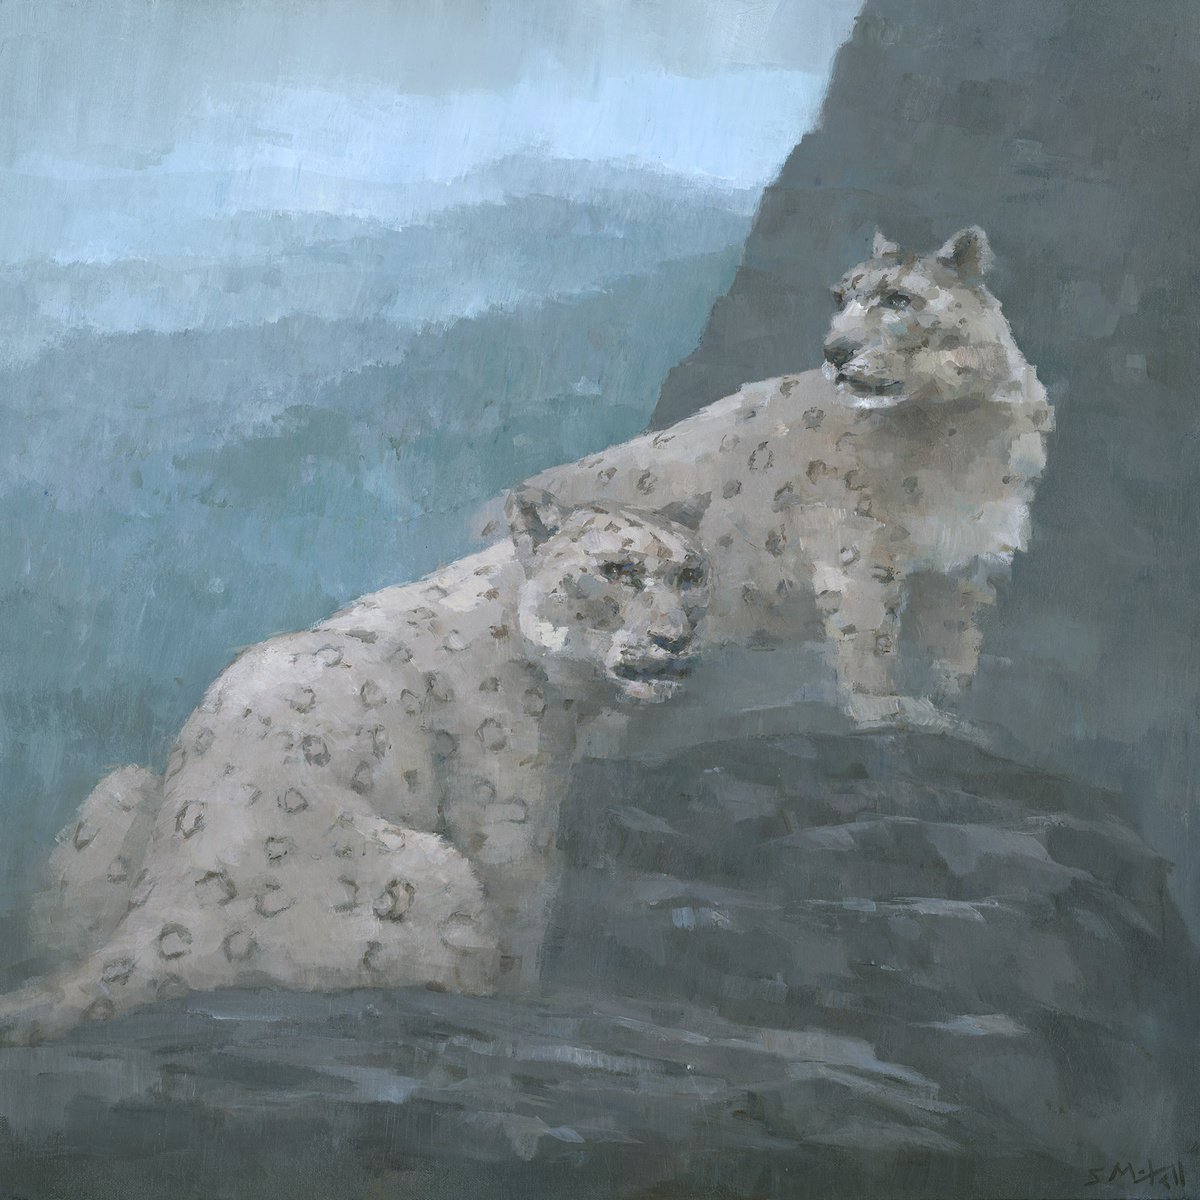 Realm of the Snow Leopards by Steve Mitchell